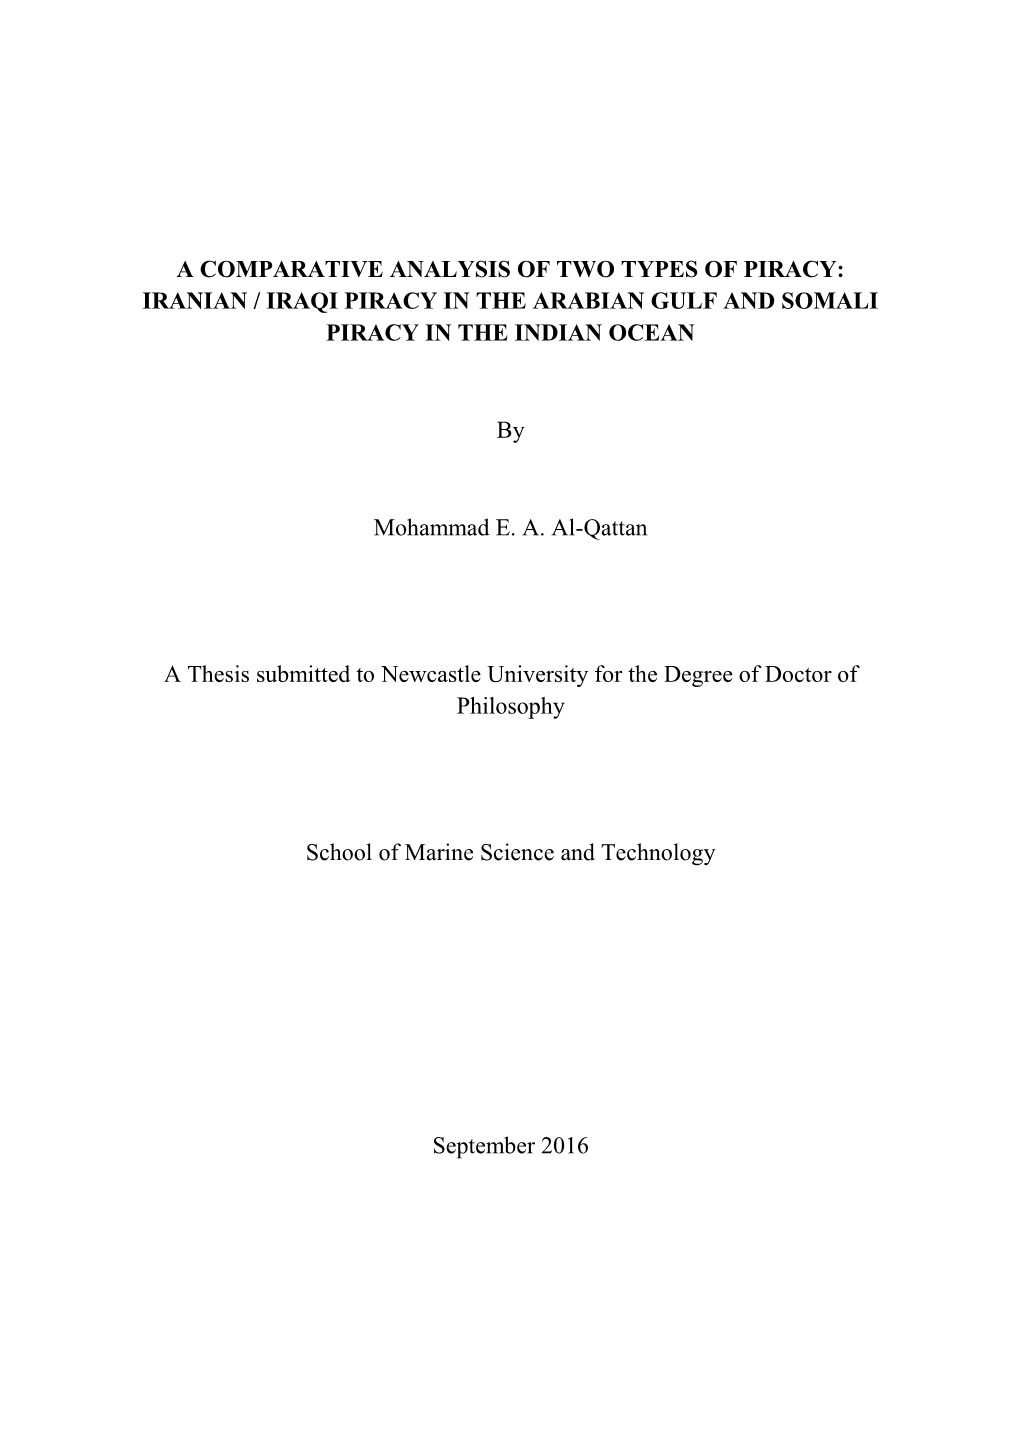 A Comparative Analysis of Two Types of Piracy: Iranian / Iraqi Piracy in the Arabian Gulf and Somali Piracy in the Indian Ocean